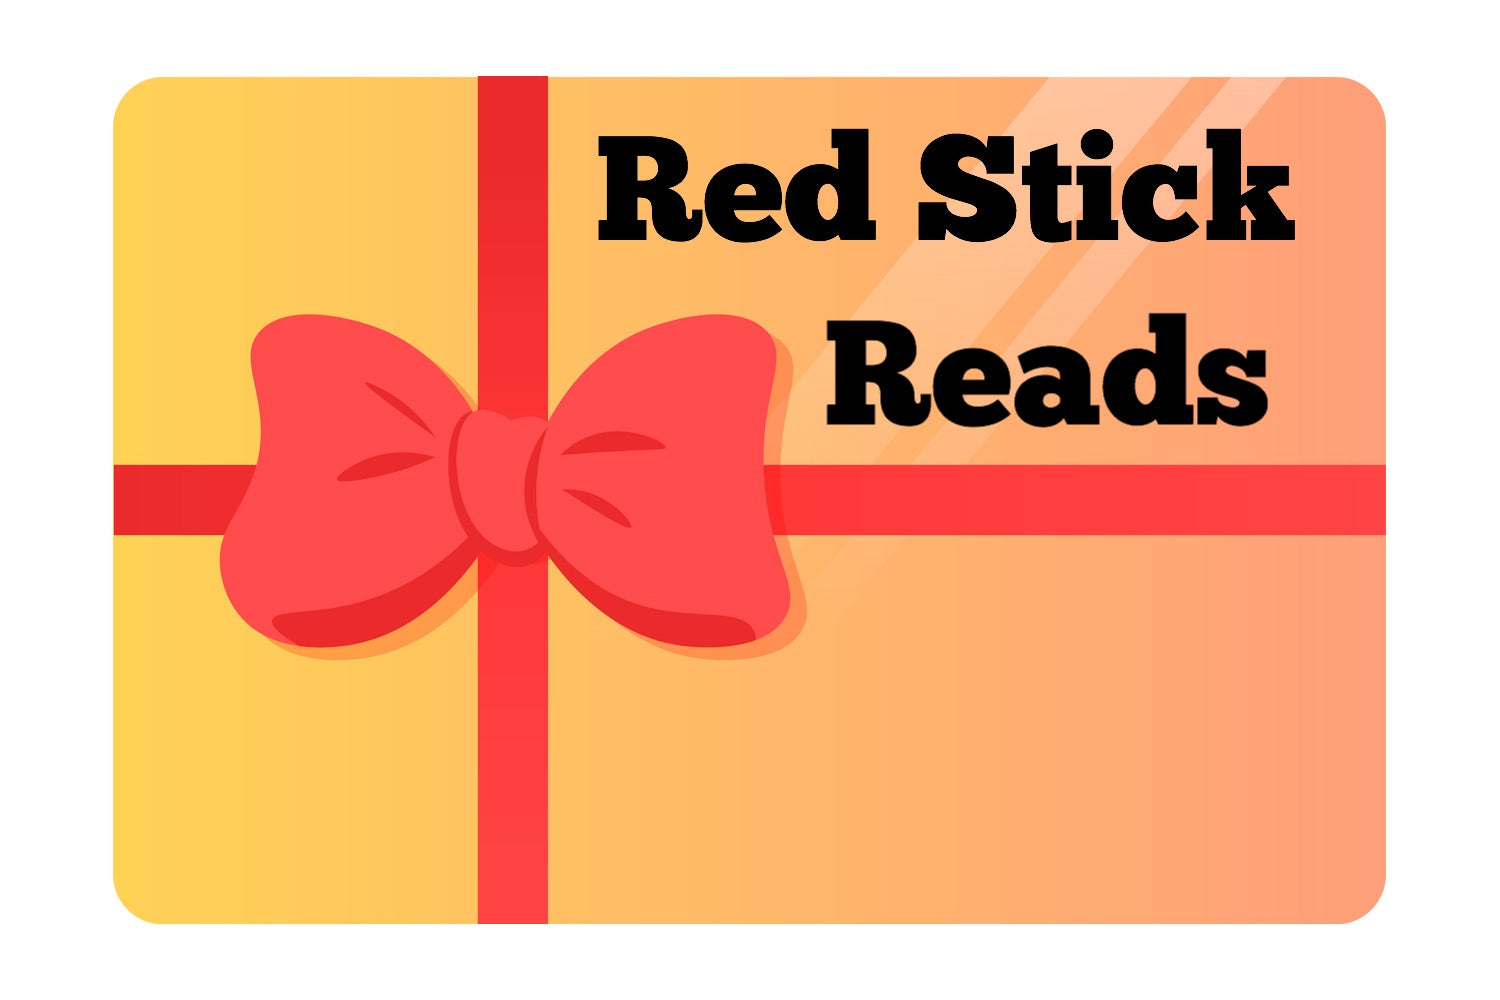 Red Stick Reads (@redstickreads) • Instagram photos and videos